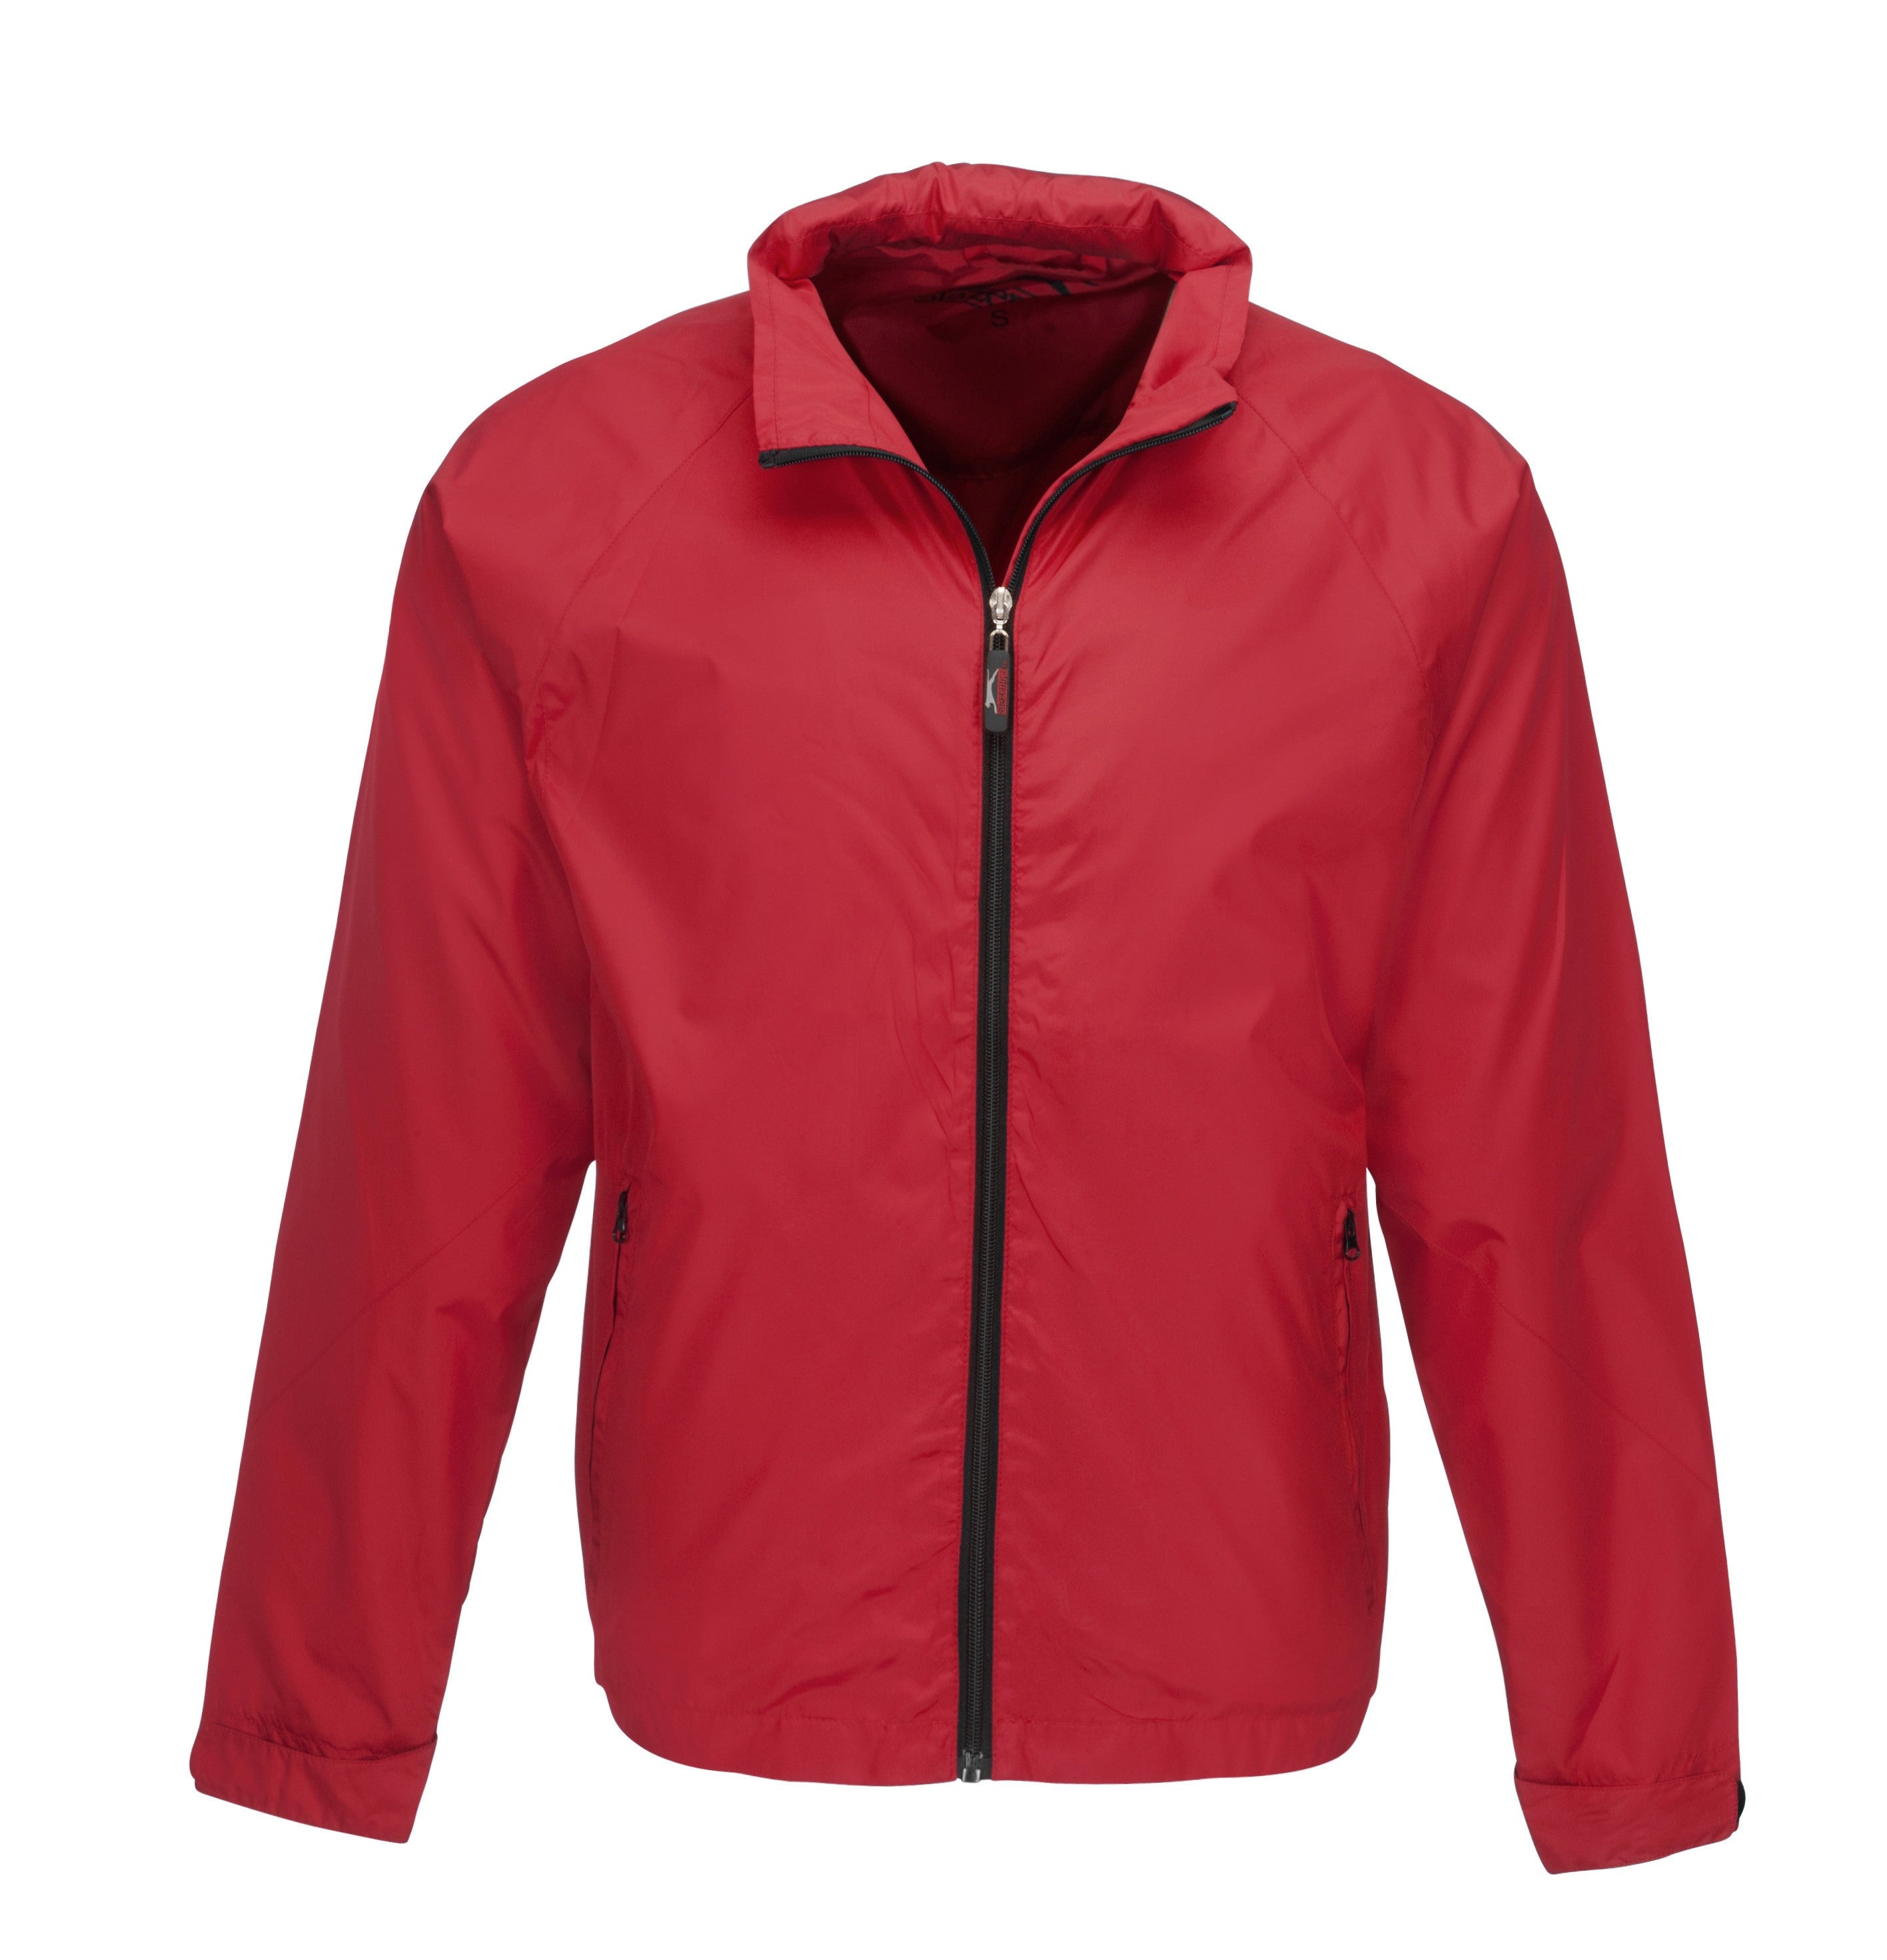 Mens Trainer Jacket - Red 2XL / R